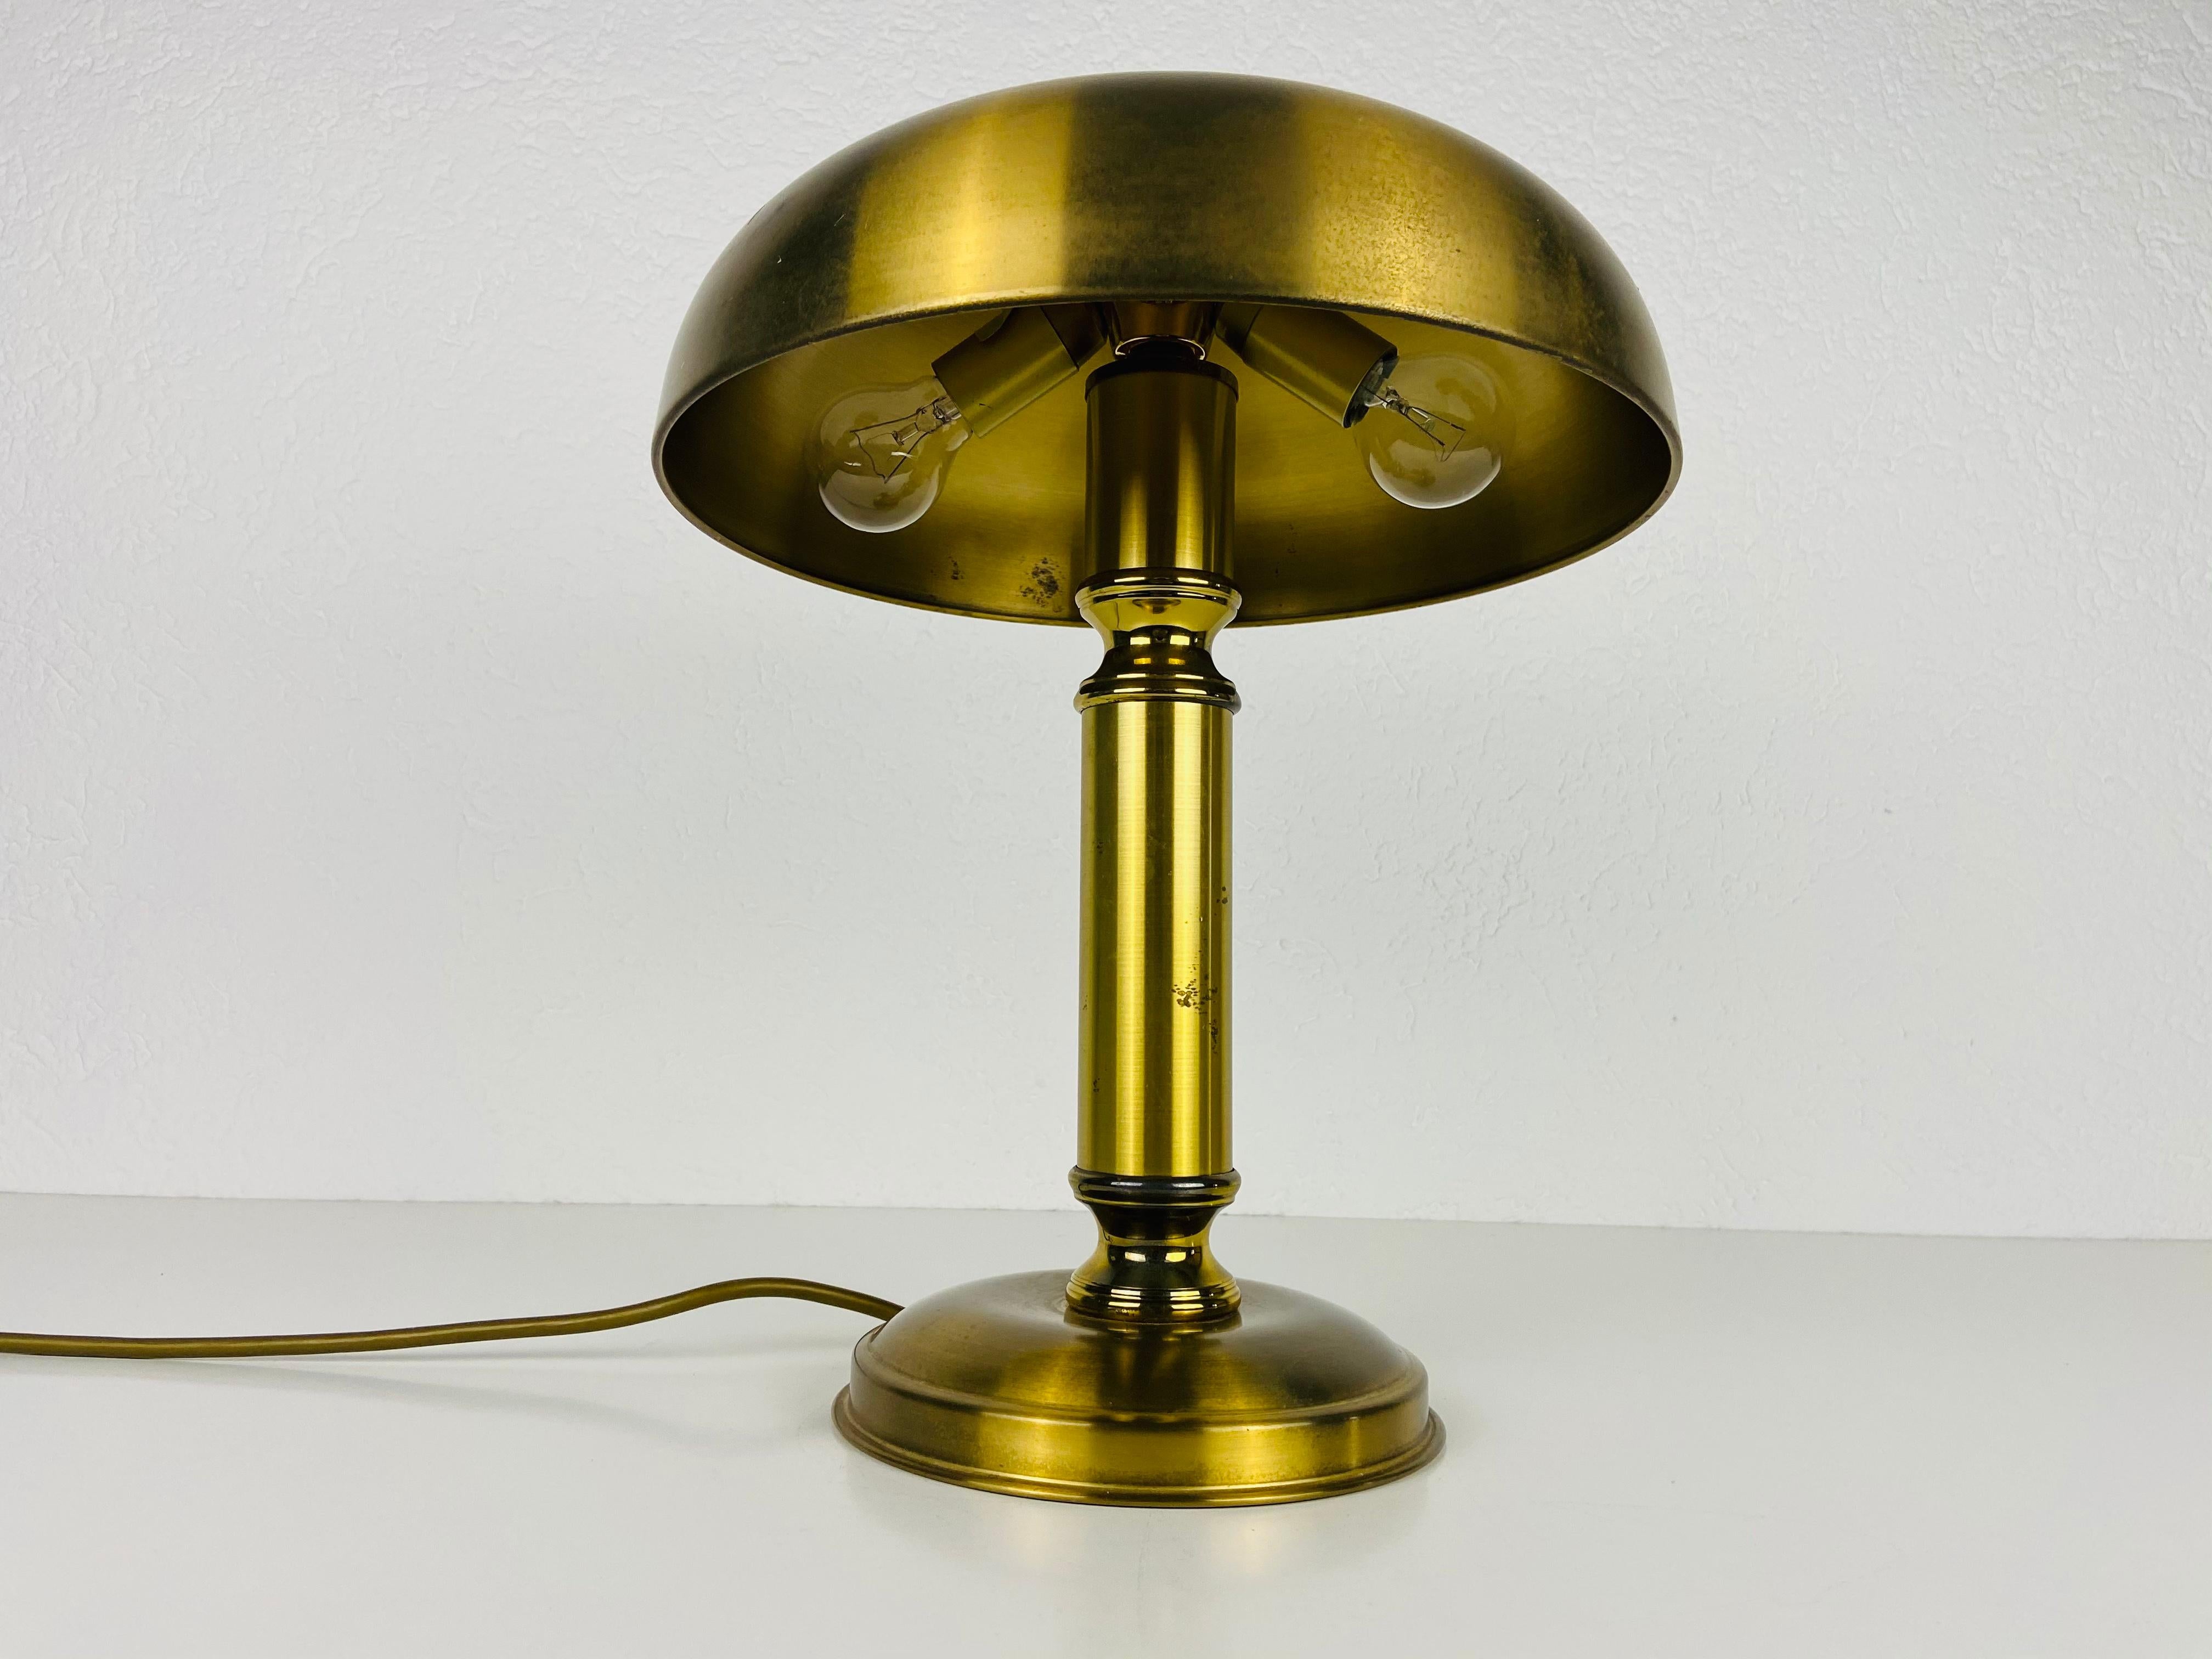 1 of 2 Midcentury Full Brass Table Lamps, 1960s, Germany For Sale 4